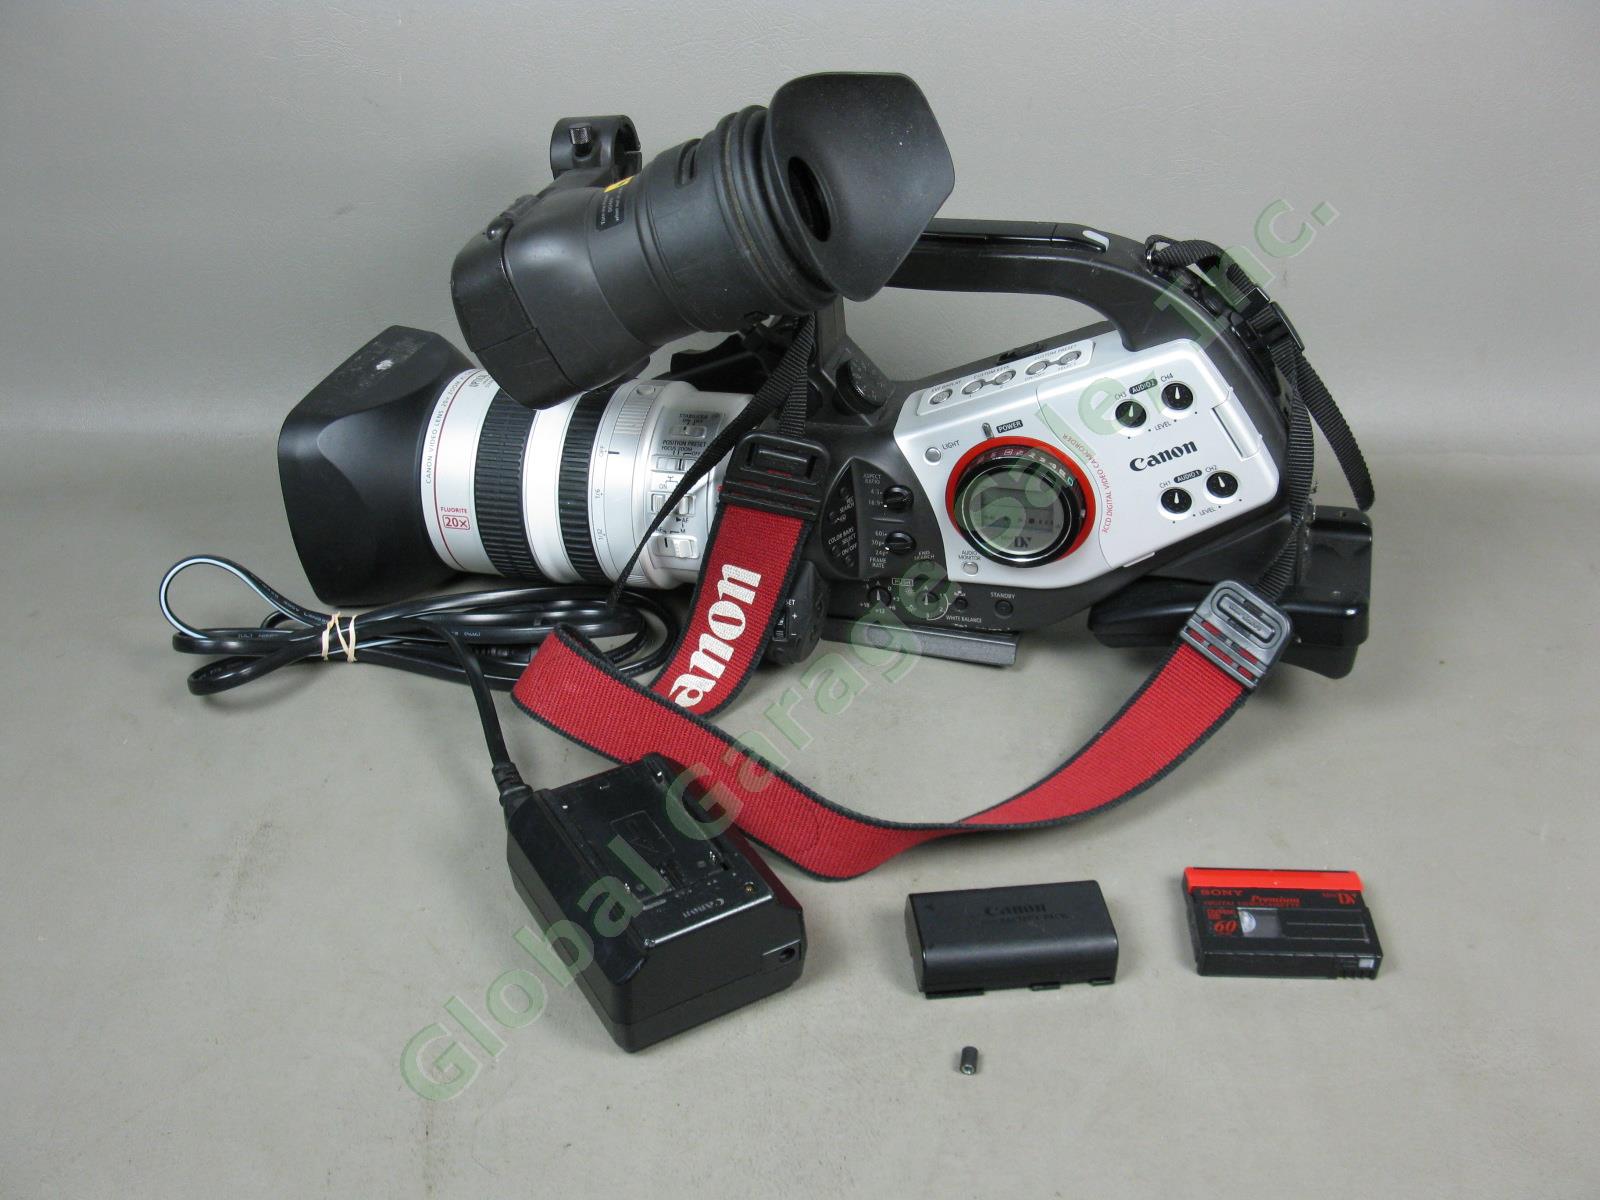 Canon XL2 MiniDV 3CCD Video Camcorder 20X Zoom Lens Battery CA920 Charger Bundle